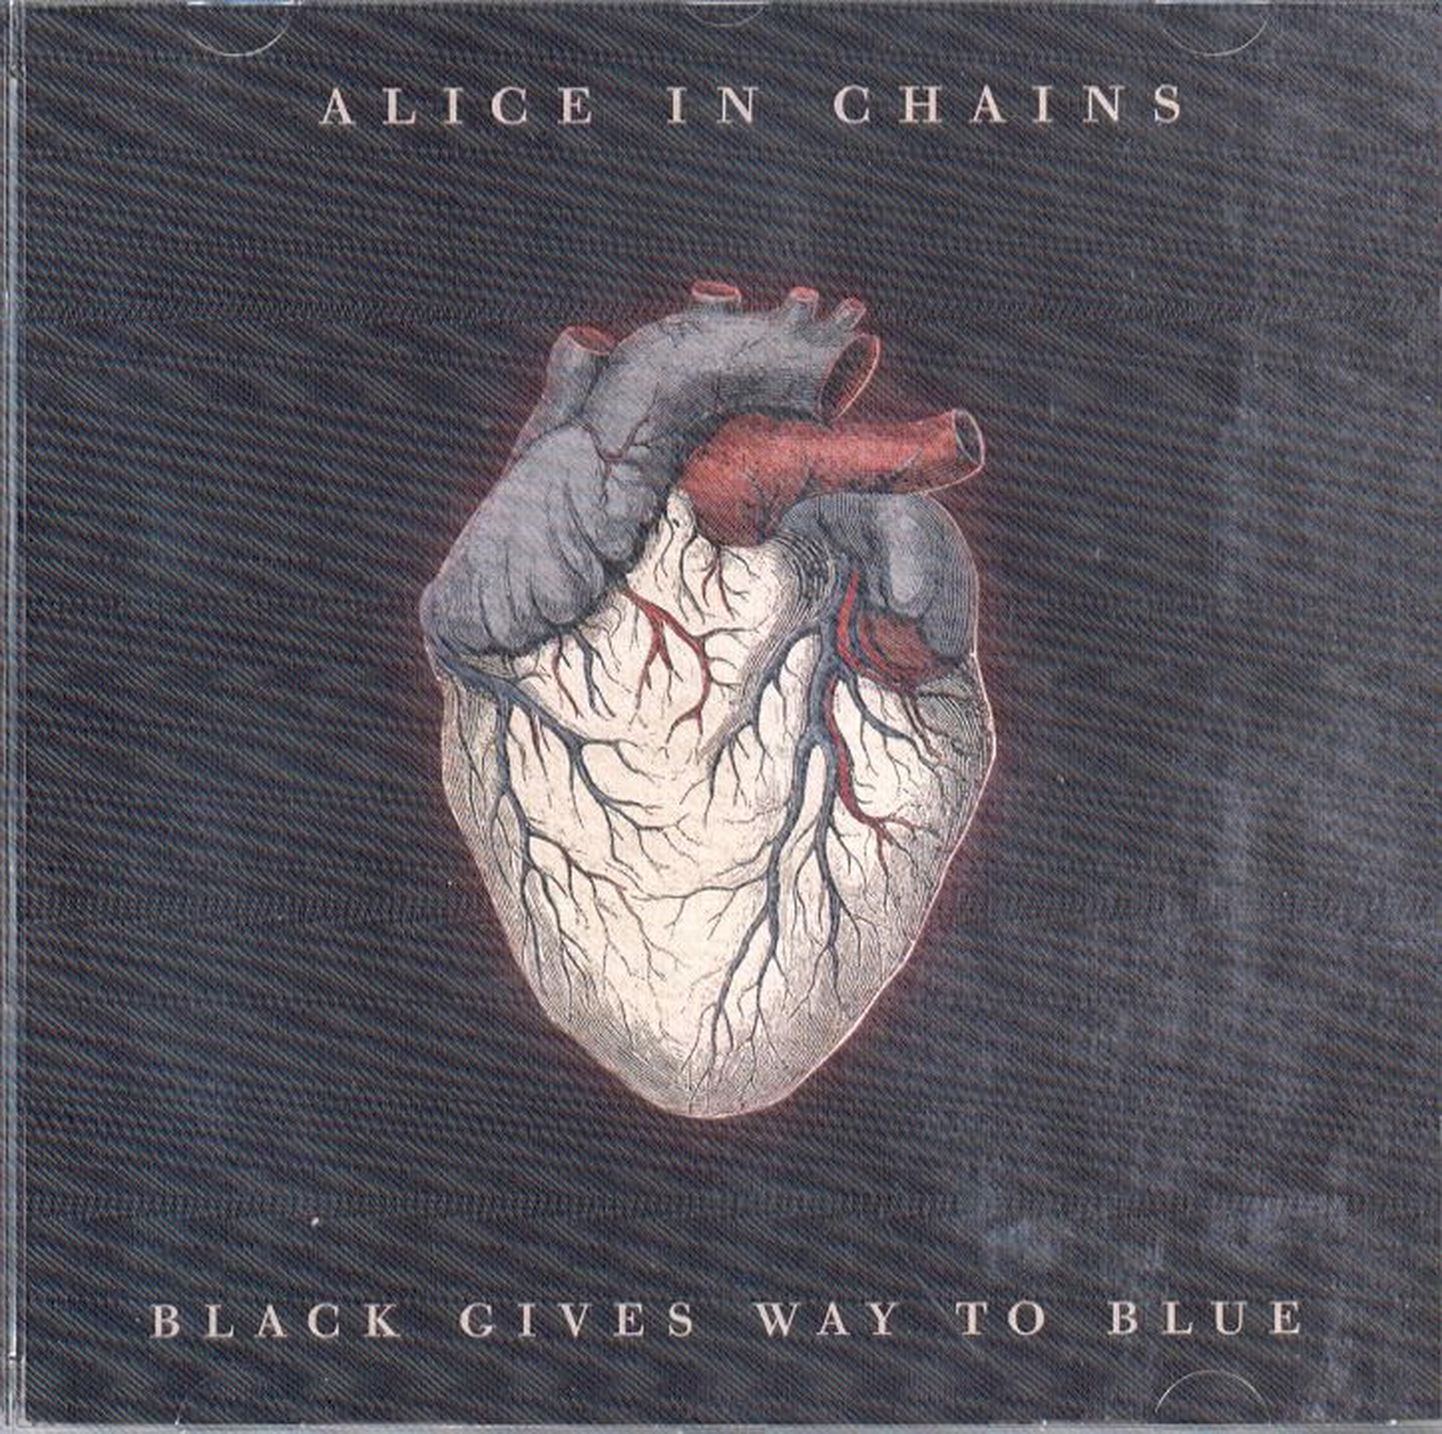 Alice in Chains “Black Gives Way to Blue”.